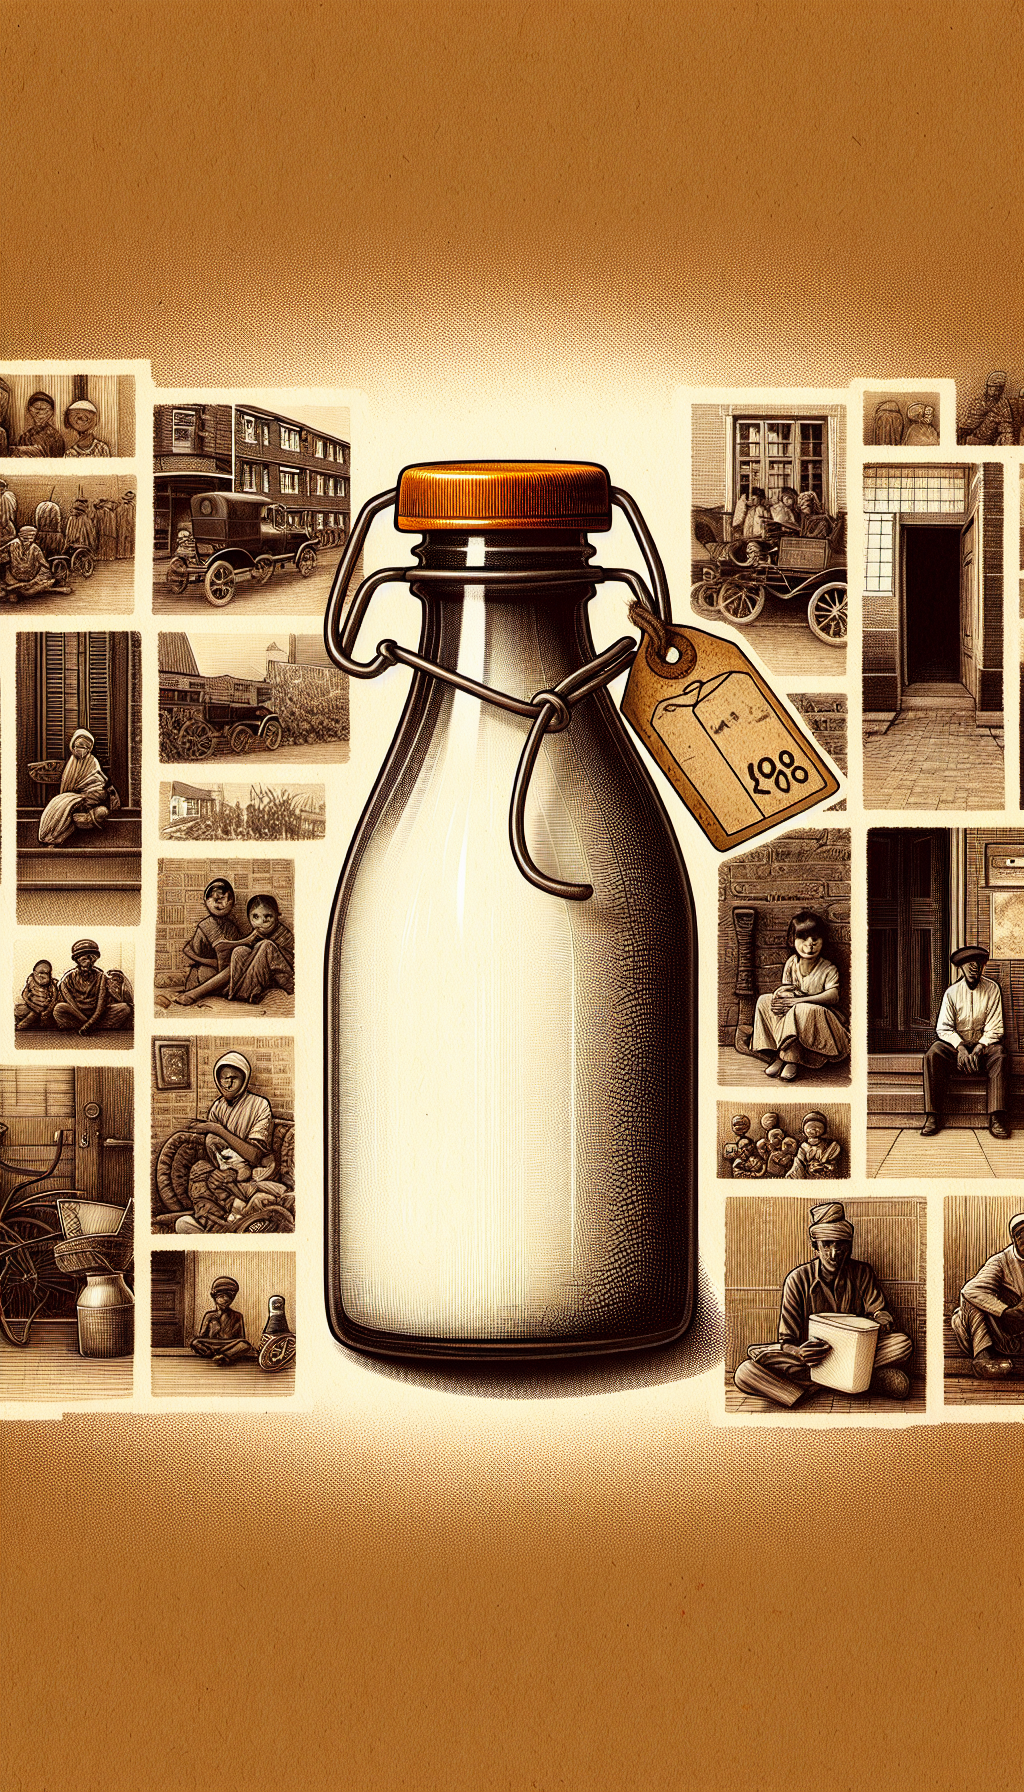 An evocative collage of sepia-tinted scenes clusters around a central, vibrantly colored, old-fashioned milk bottle. A ghostly overlay of dated price tags dangles from the bottle's neck, symbolizing the fluctuating values of these artifacts. Each vignette showcases a moment in history—a milkman on his route, children on a doorstep—tying the humble milk bottle to its enduring cultural legacy.